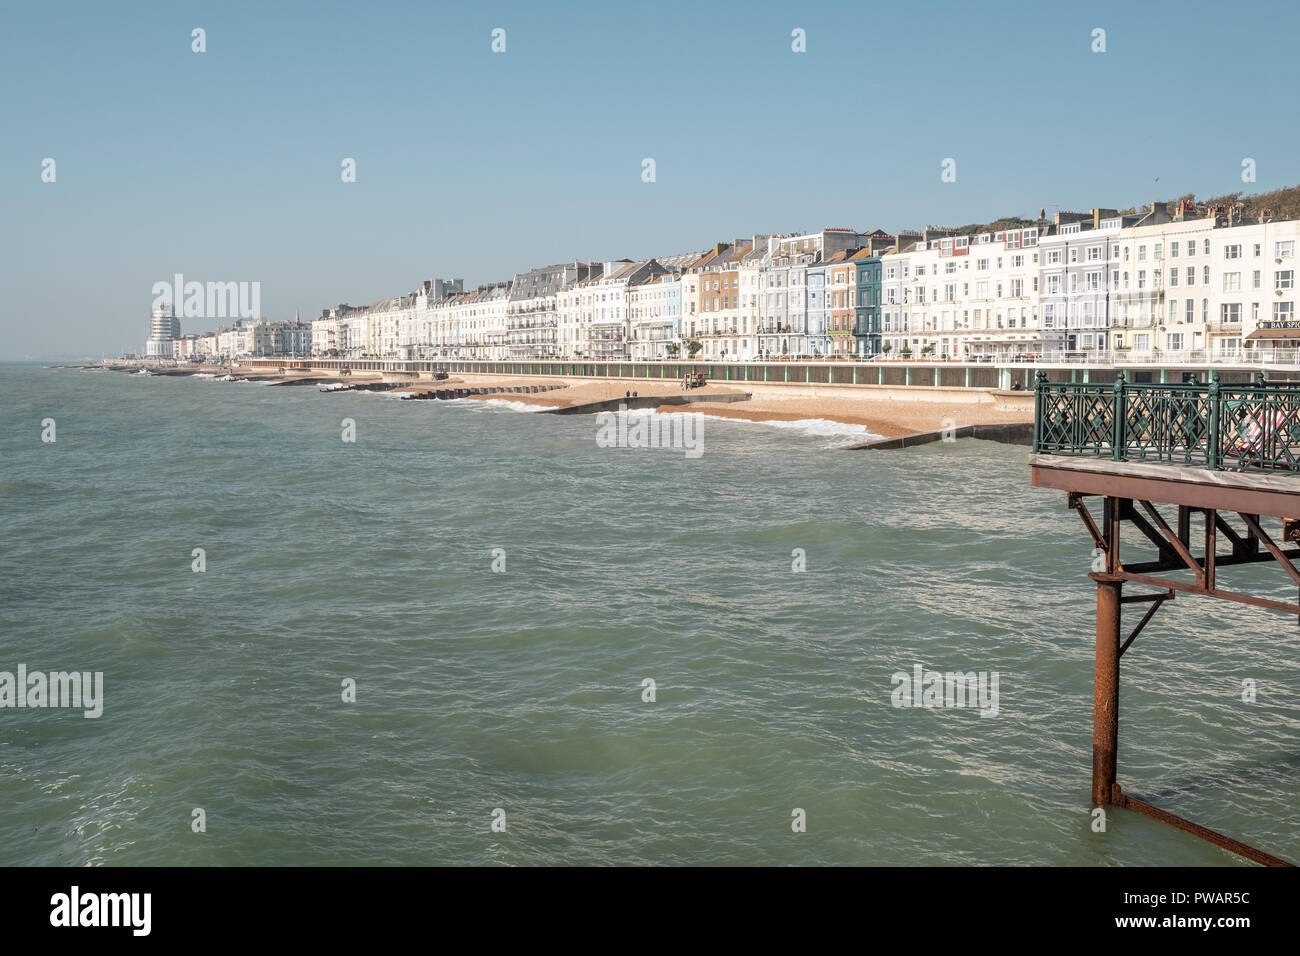 View of Hastings Seafront, from the Pier, East Sussex, UK Stock Photo